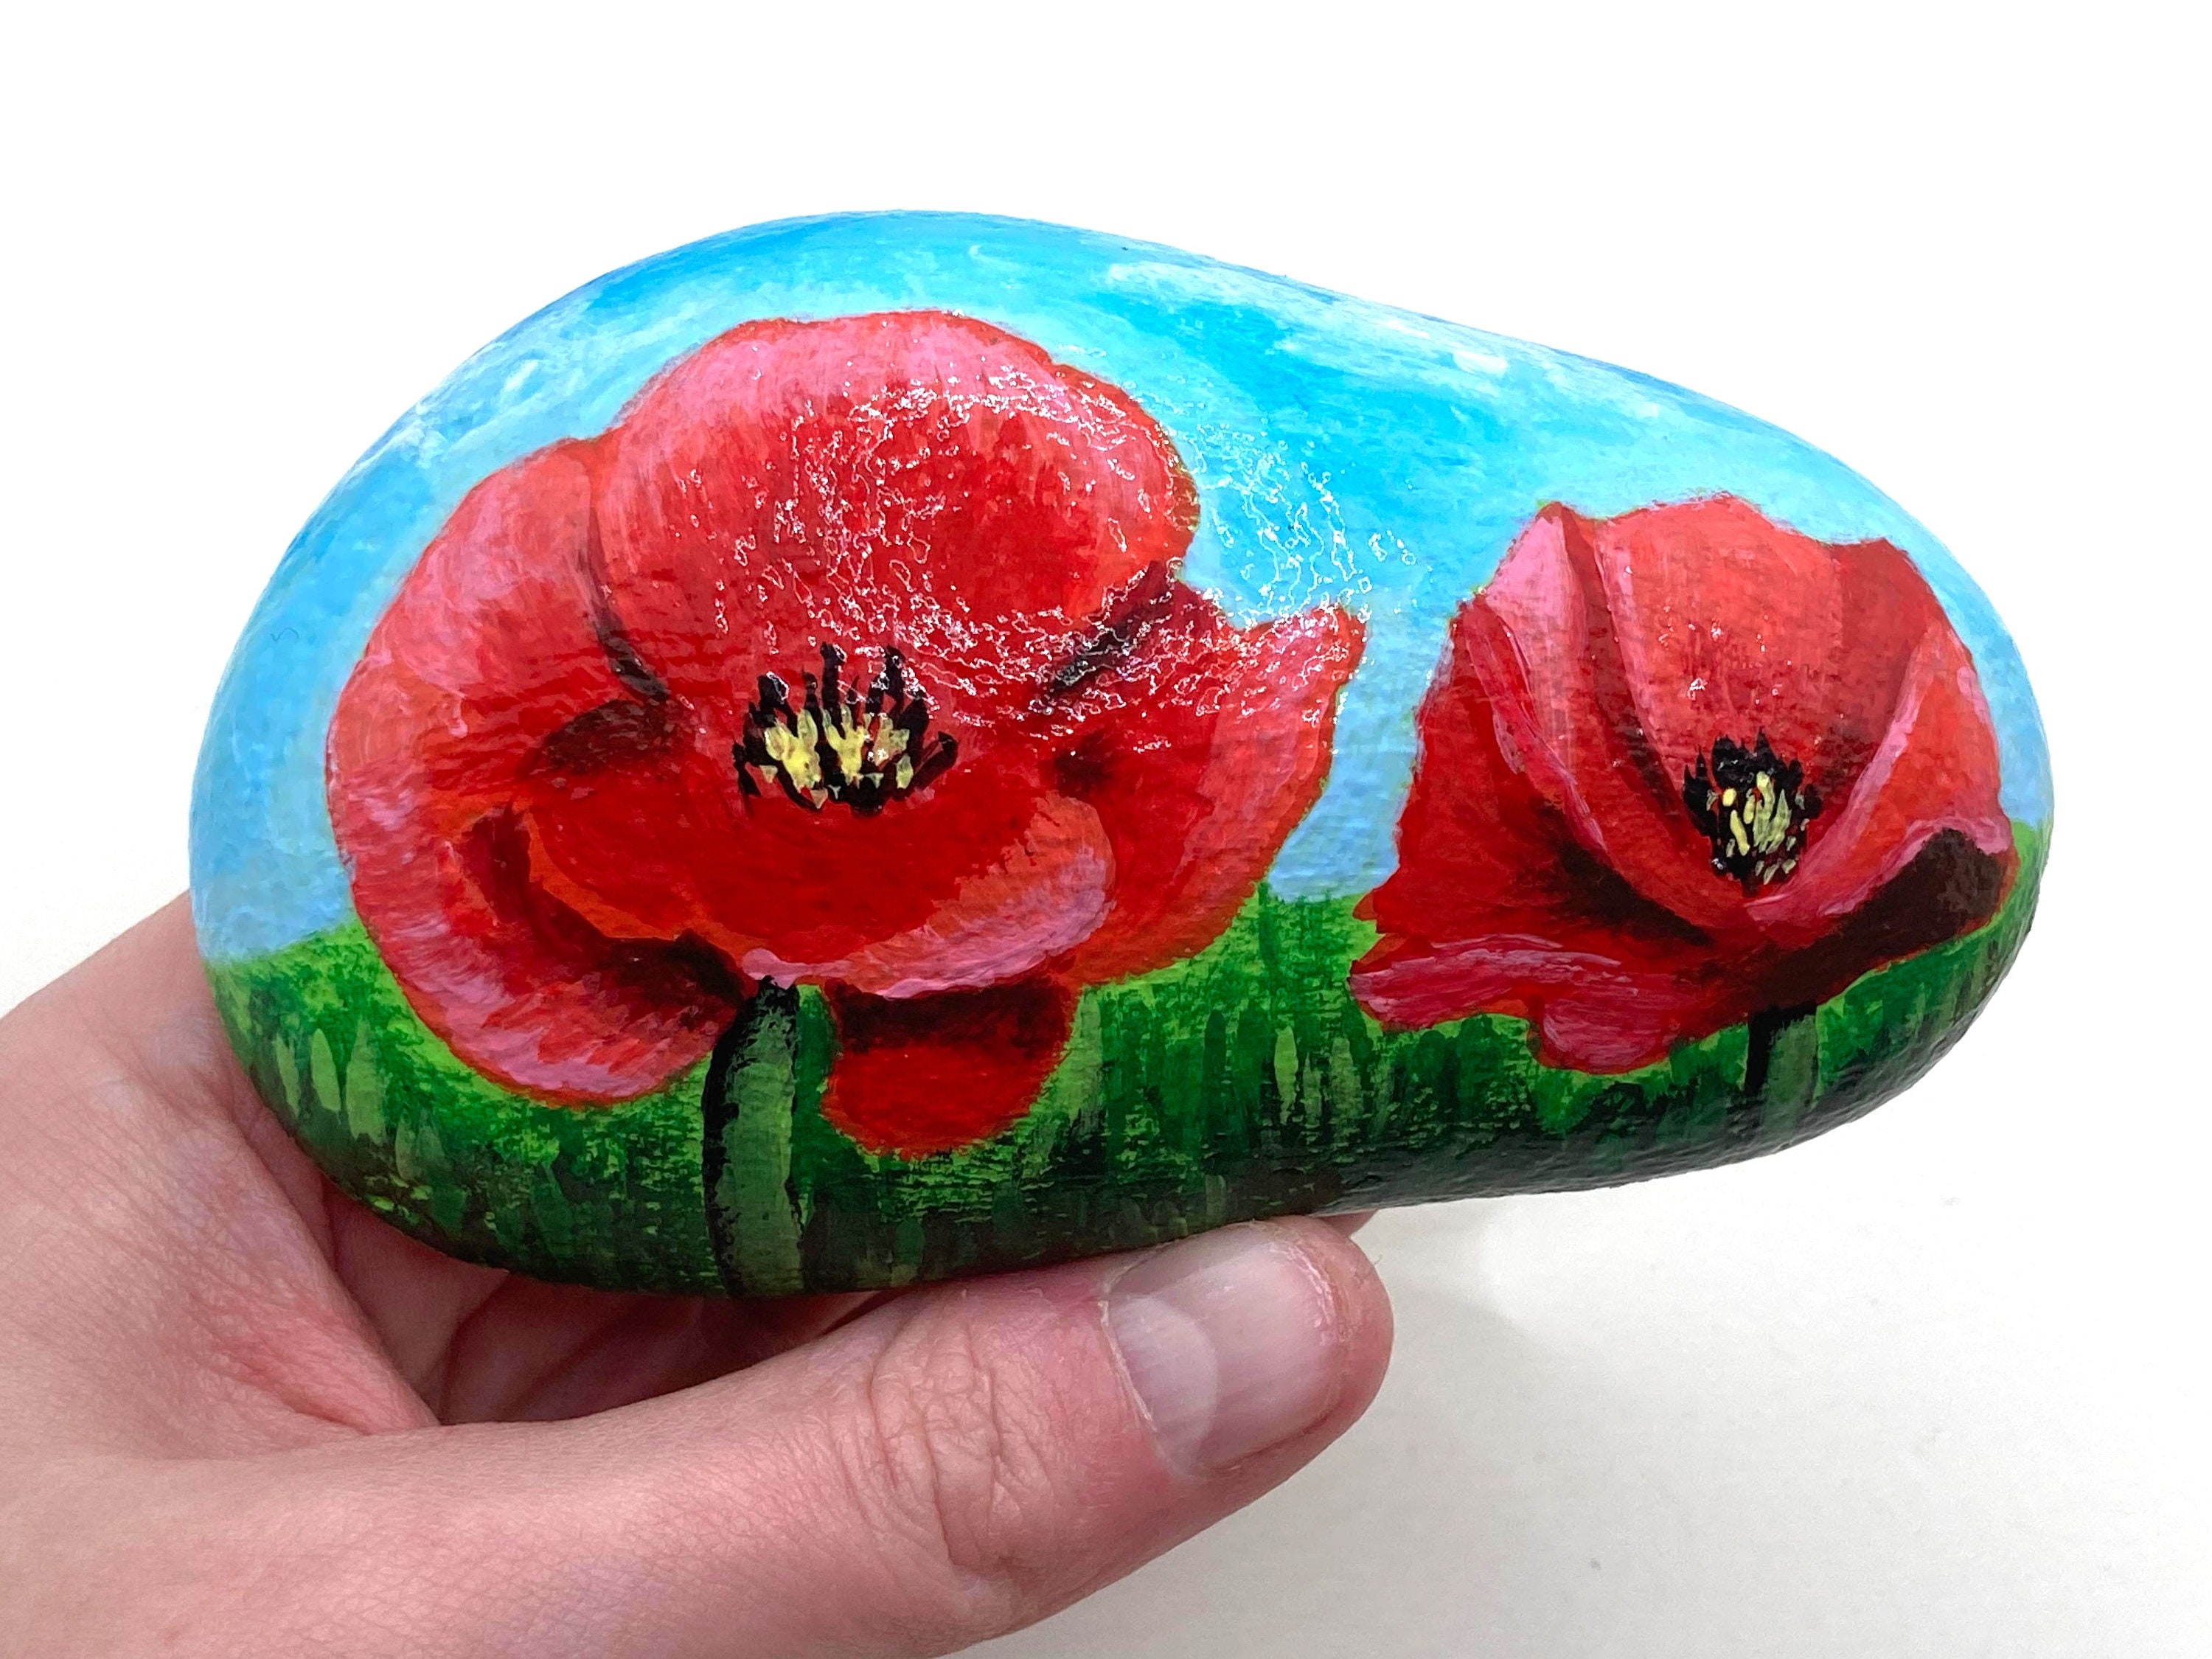 Poppy gets 'planet-friendly' makeover for Remembrance Day 2023